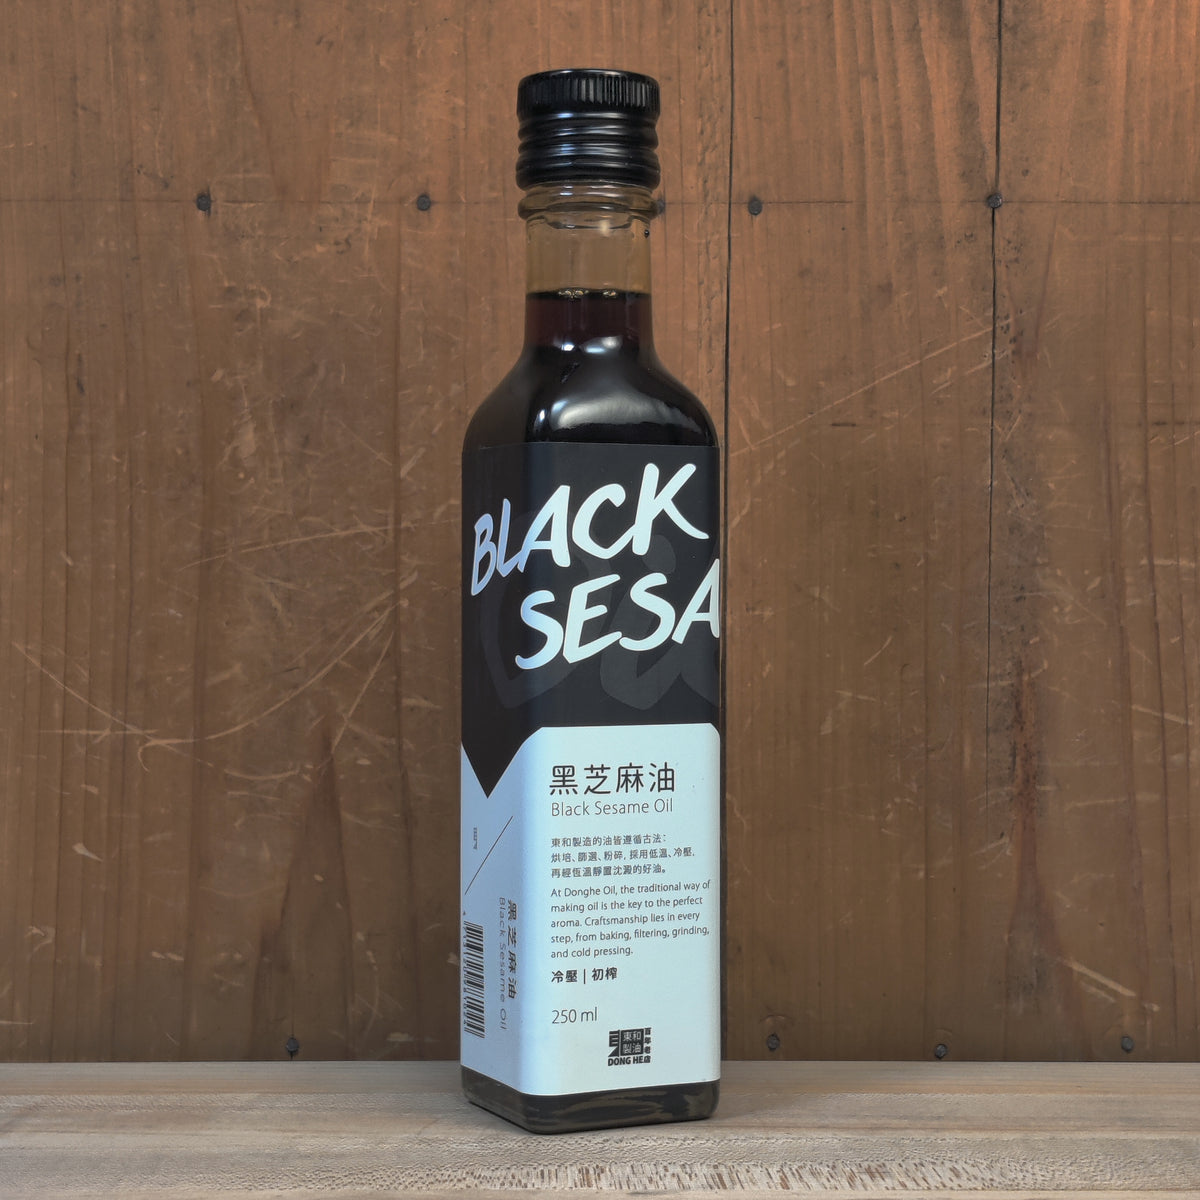 Dong He Cold Pressed Black Sesame Oil - 250ml